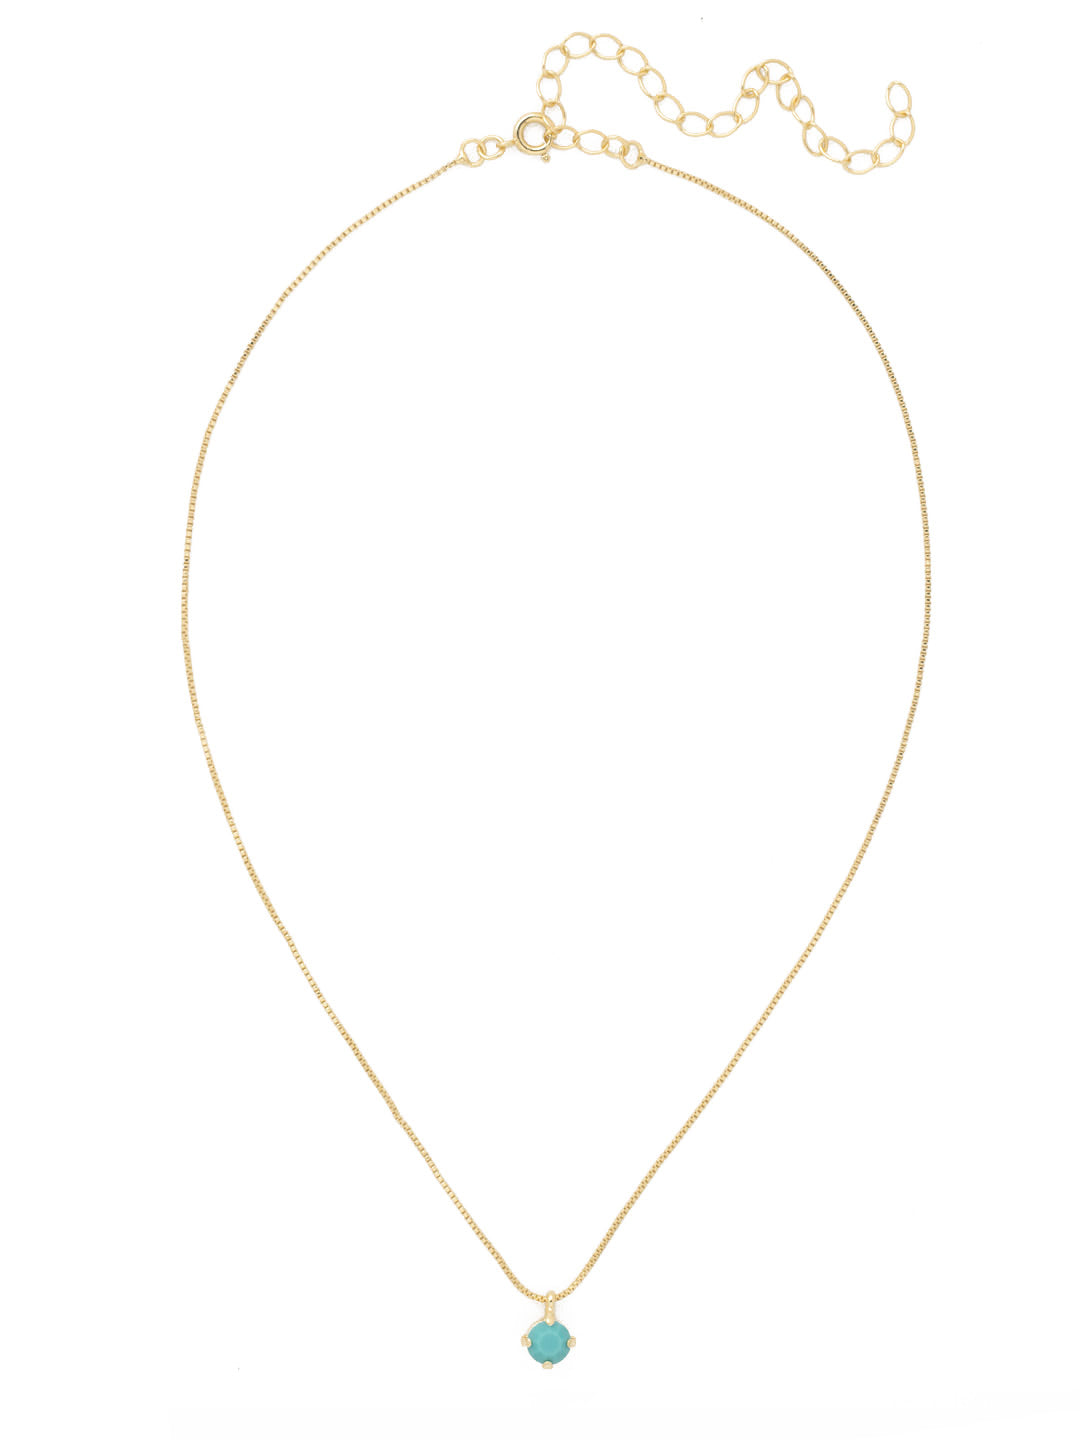 Aria Studded Pendant Necklace - NFL88BGSTO - <p>The Aria Studded Pendant Necklace features a single small round cut crystal dangling from a delicate chain, secured with a spring ring clasp. From Sorrelli's Santorini collection in our Bright Gold-tone finish.</p>